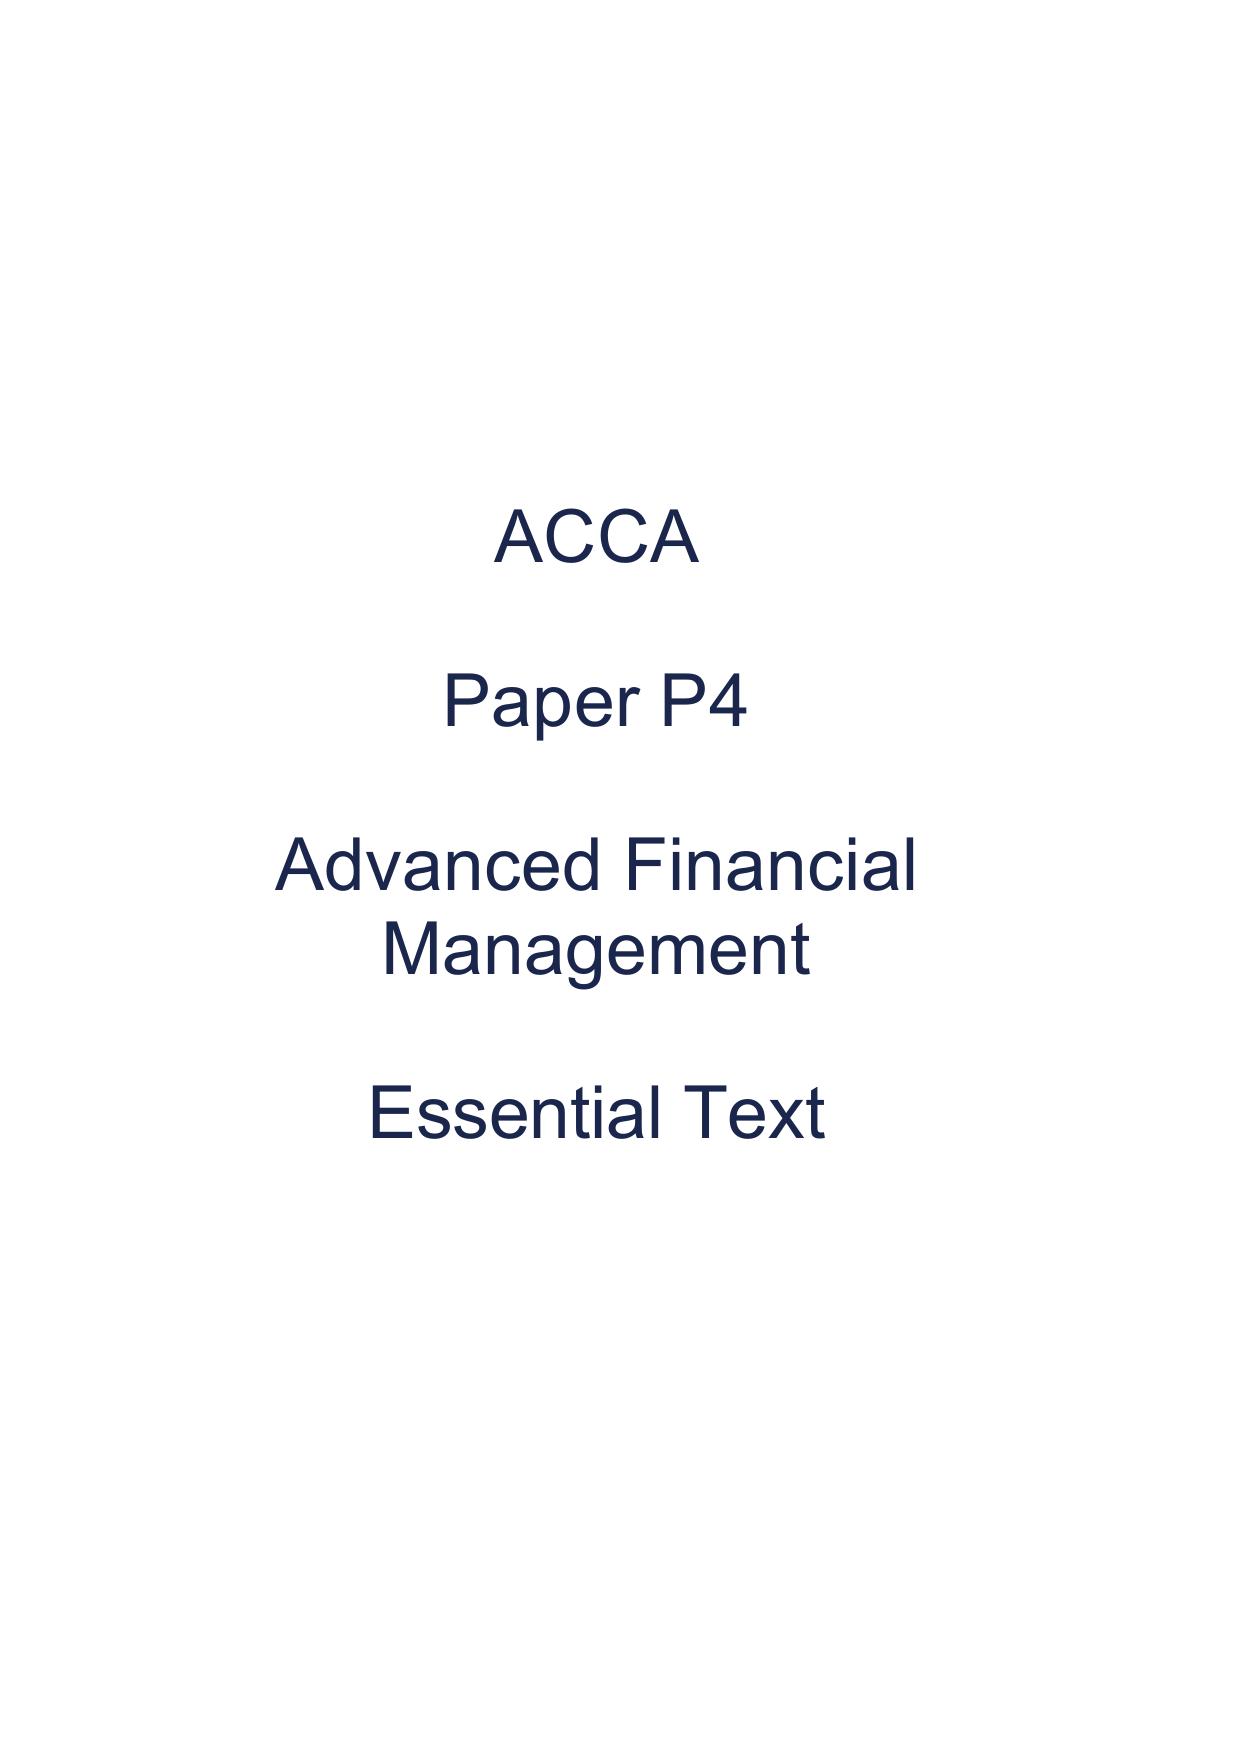 ACCA P4 Essential Text 2013 BOOK -ADVANCED FIN MGT